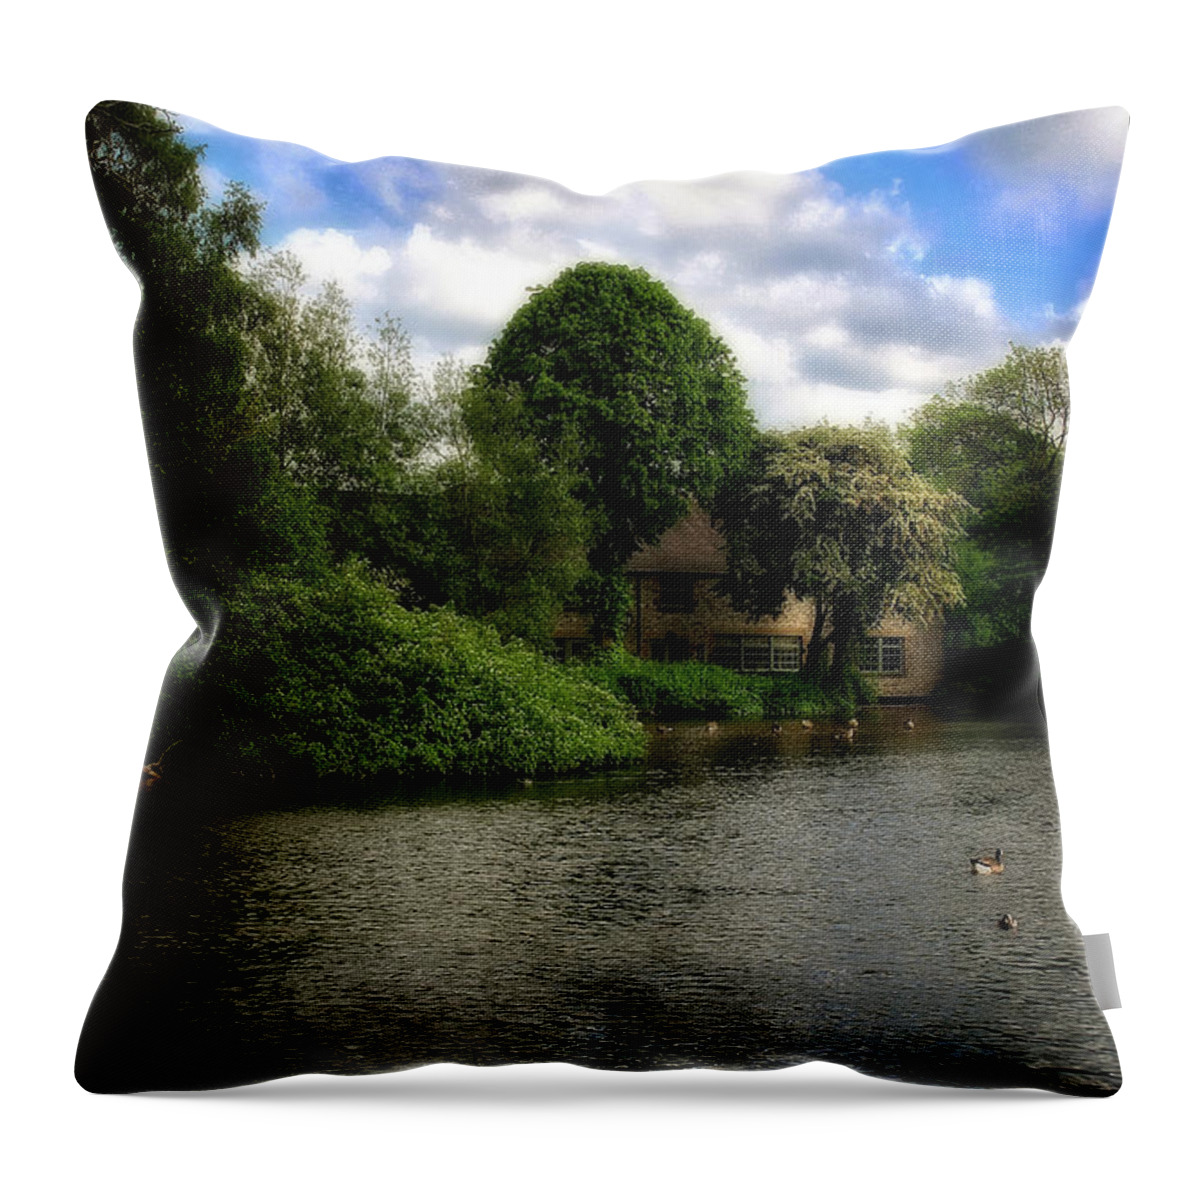 Trees Throw Pillow featuring the photograph River Weir At Bakewell - Peak District - England #2 by Doc Braham